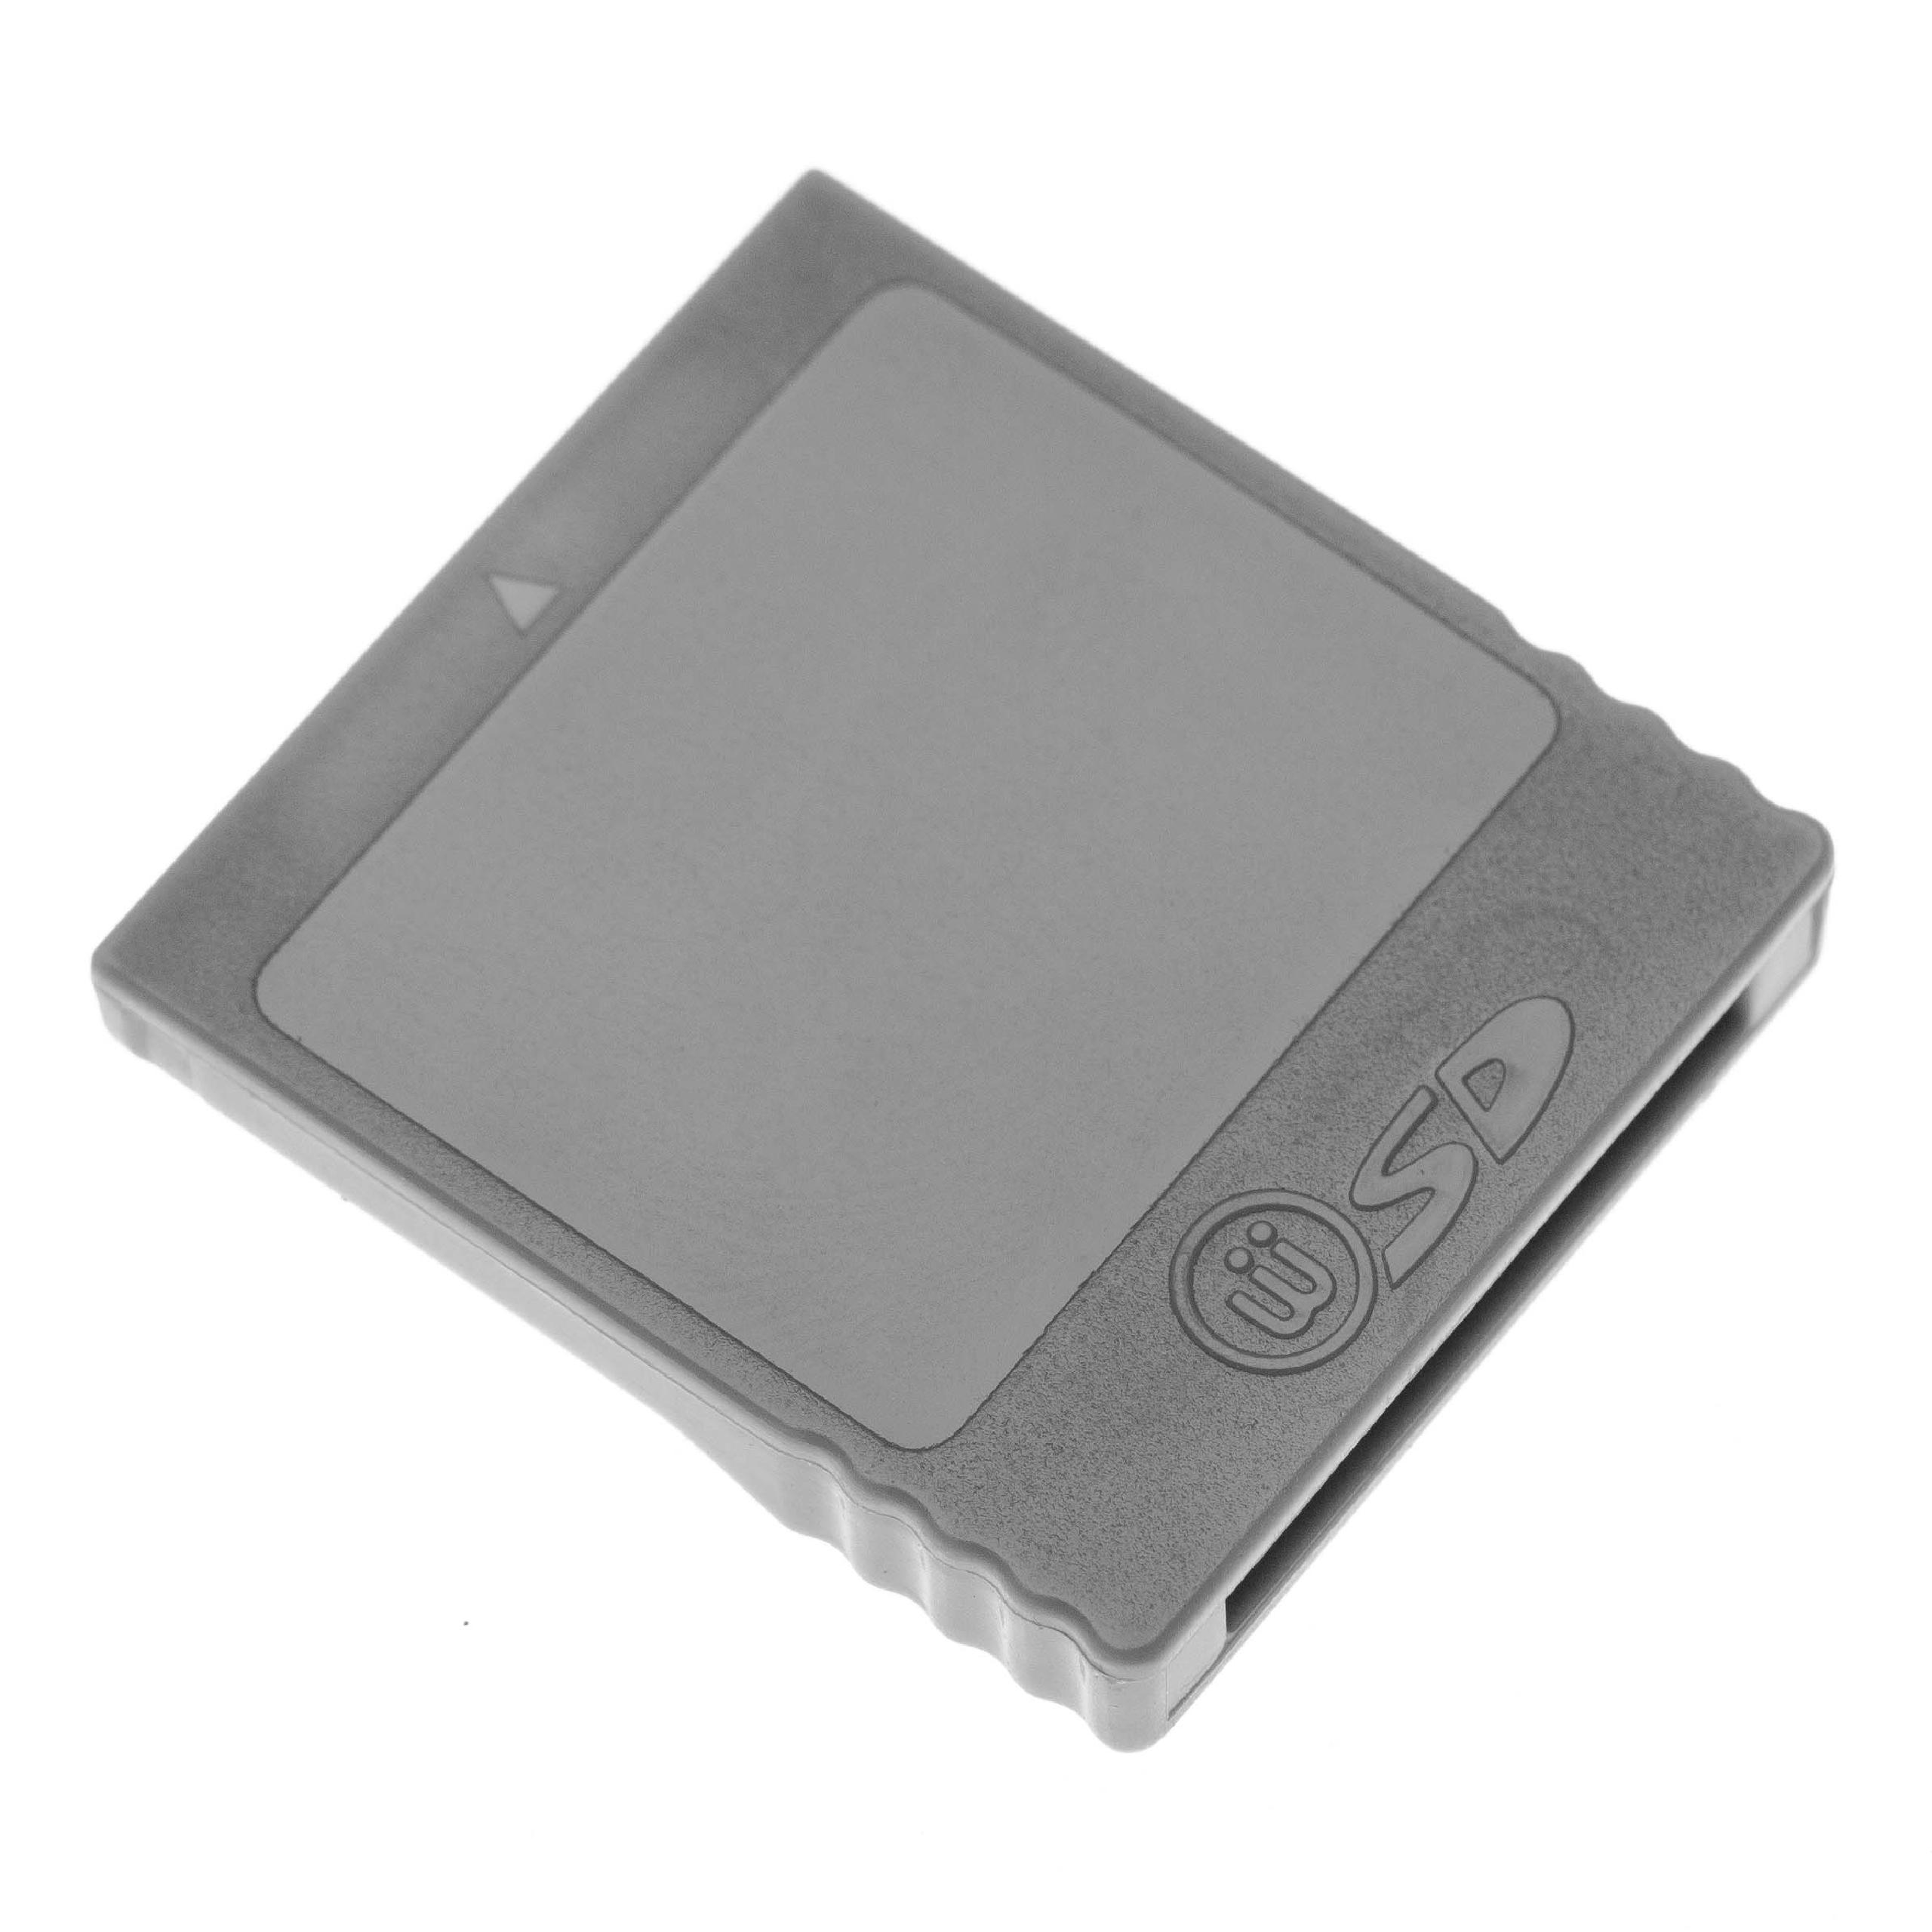 SD Card Adapter suitable for Nintendo GameCube, Wii game console - SD Memory Card Converter, Grey